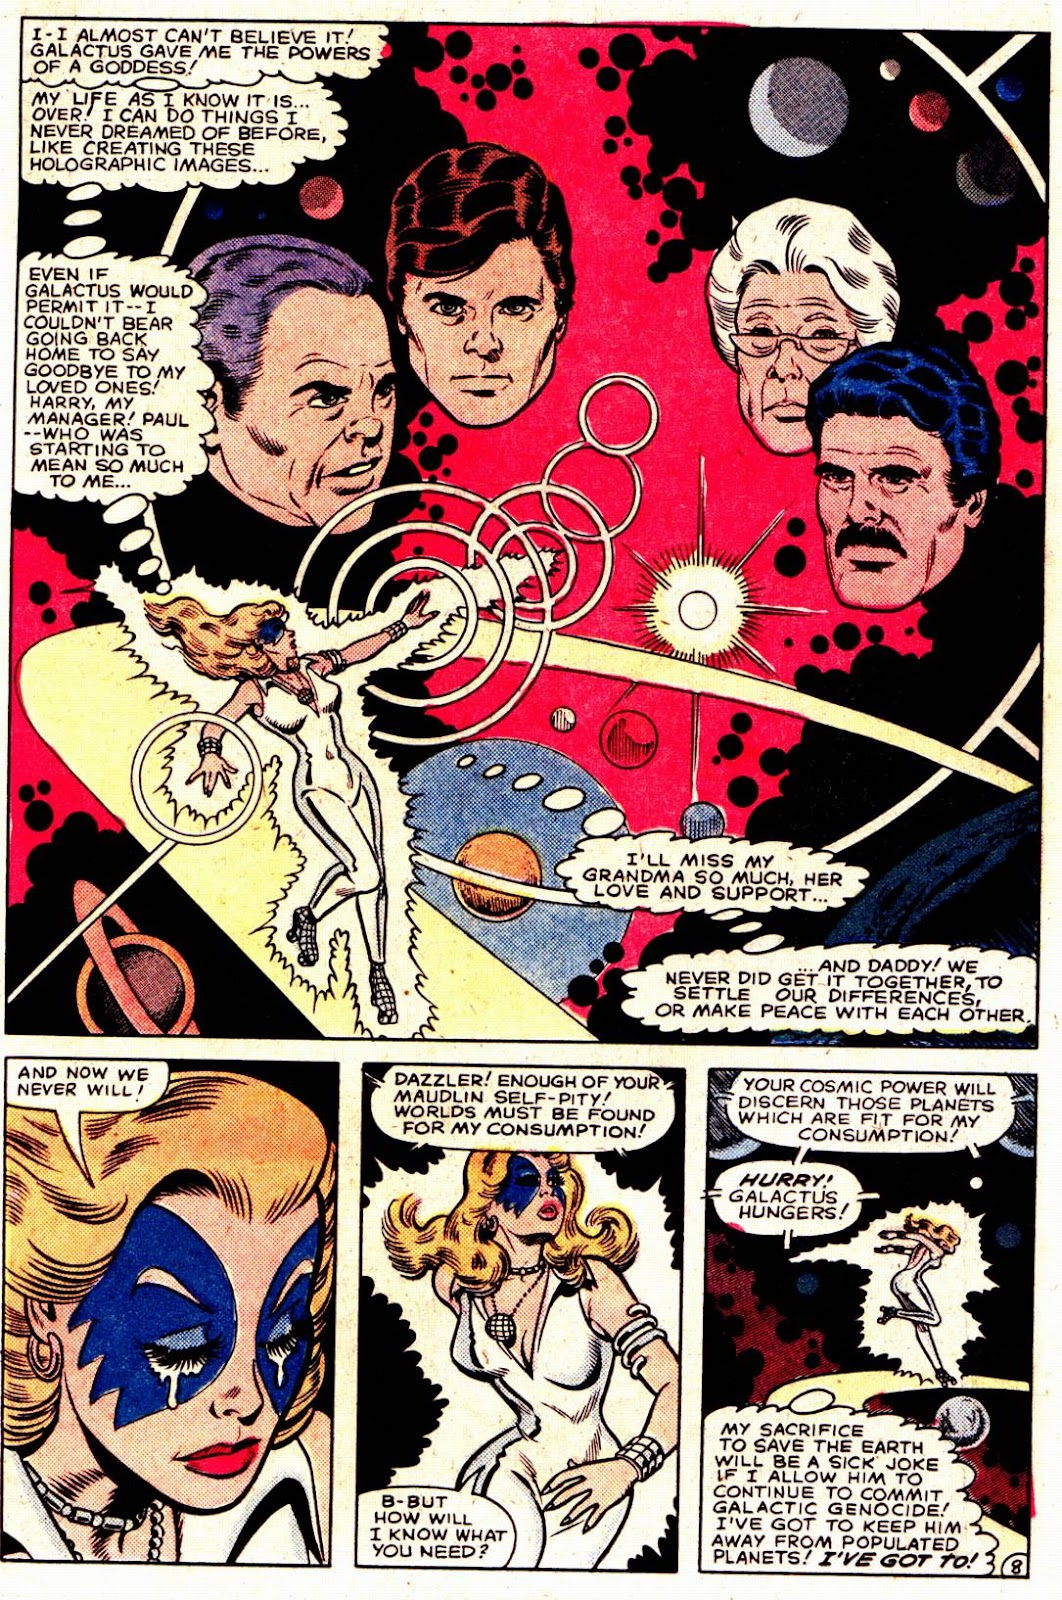 What If? (1977) issue 33 - Dazzler and Iron Man - Page 9